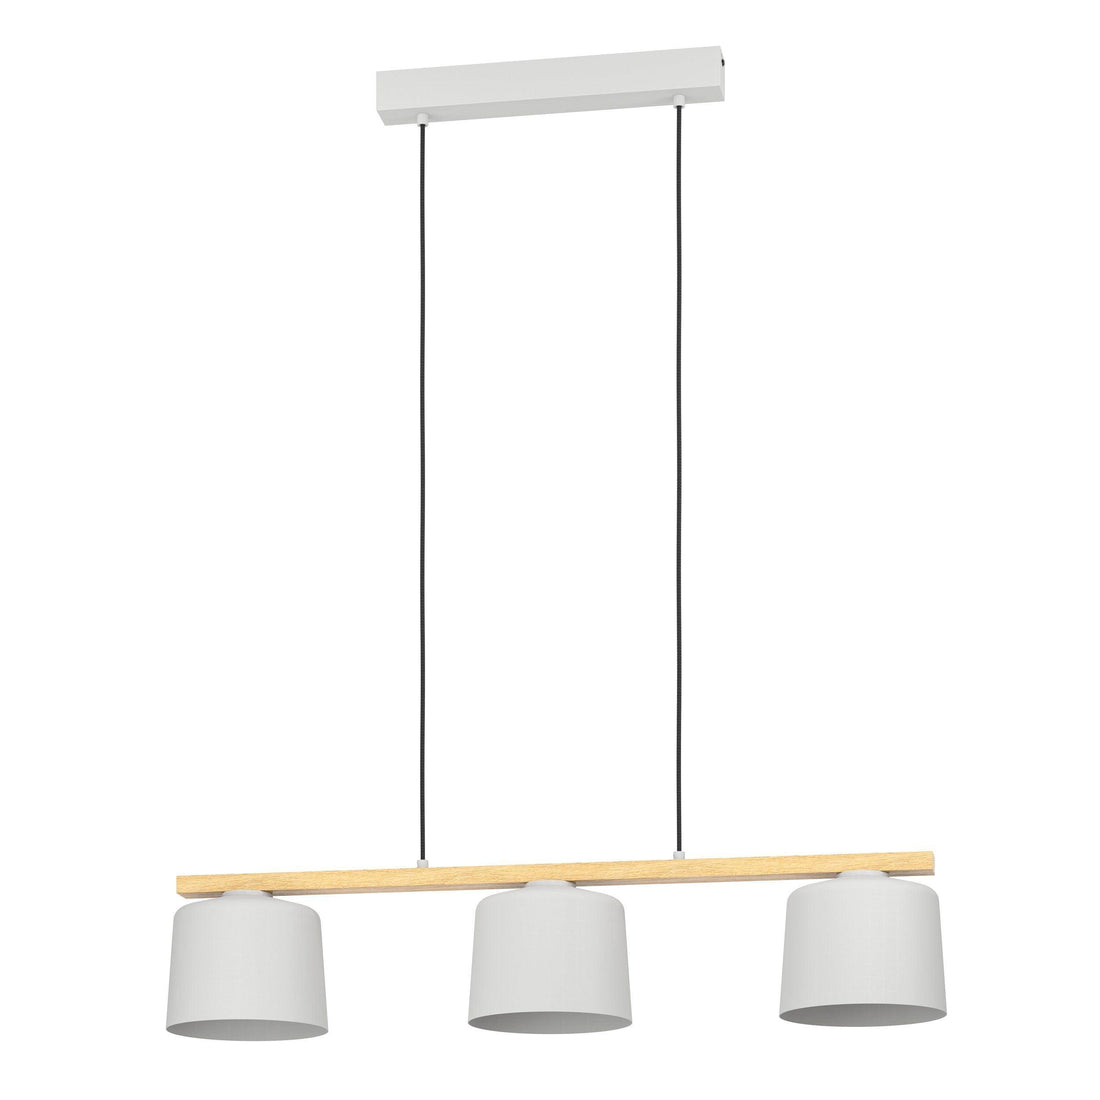 MARIEL pendant light by The Light Library